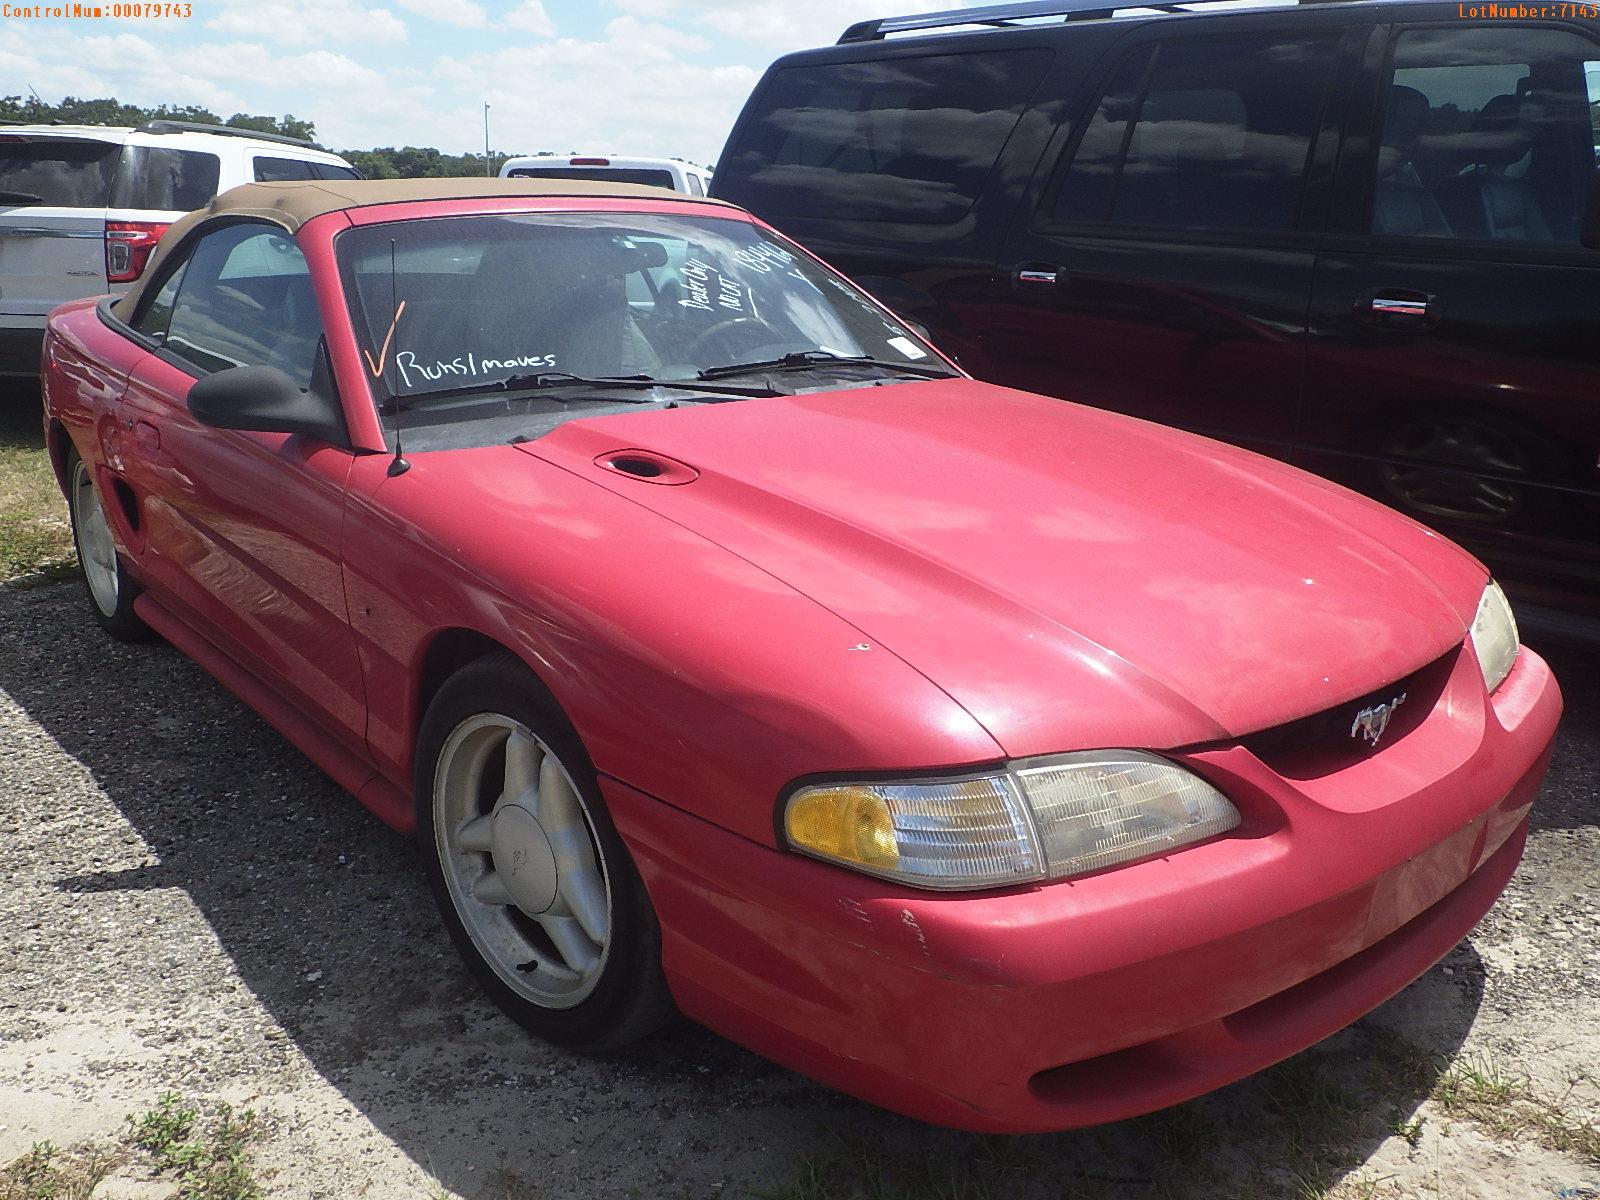 5-07143 (Cars-Convertible)  Seller:Private/Dealer 1994 FORD MUSTANG